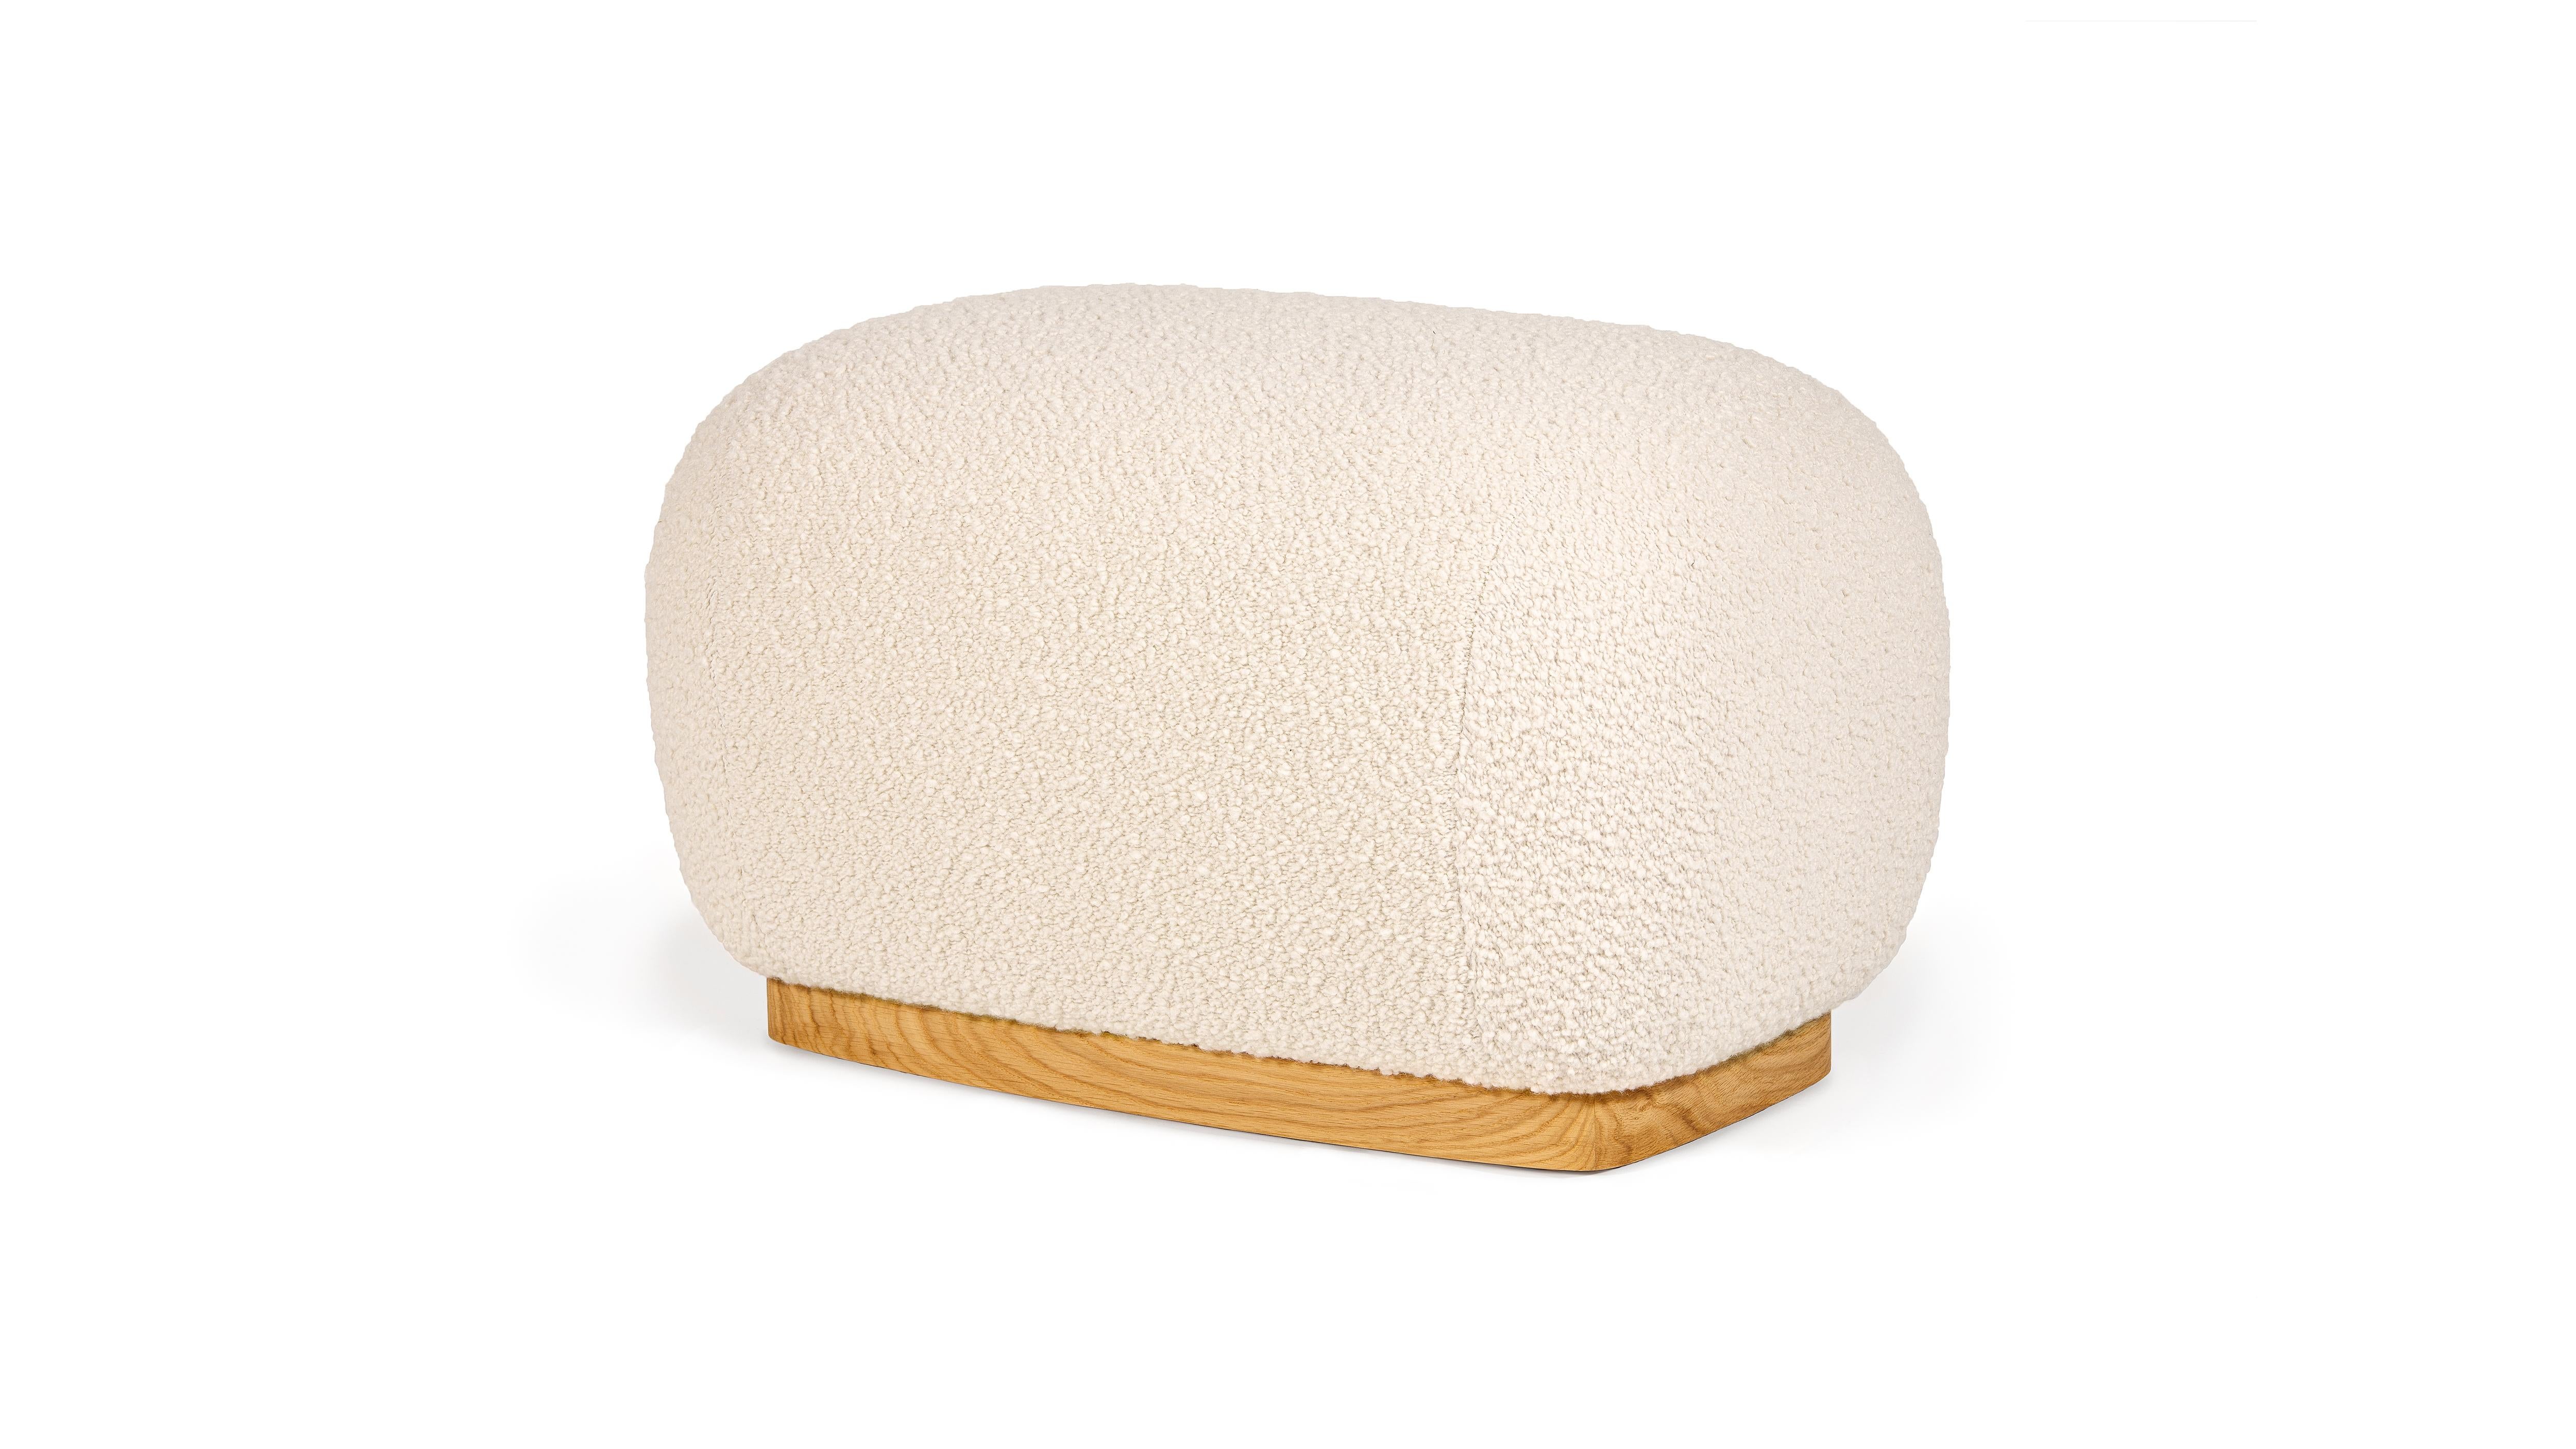 Niemeyer II Stool by InsidherLand
Dimensions: D 45 x W 70 x H 42 cm.
Materials: Oak, InsidherLand Woollen Ref. 1 fabric.
15 kg.
Available in different fabrics.

The Niemeyer II stool is a curvy seating, designed to complement the rounded shapes of